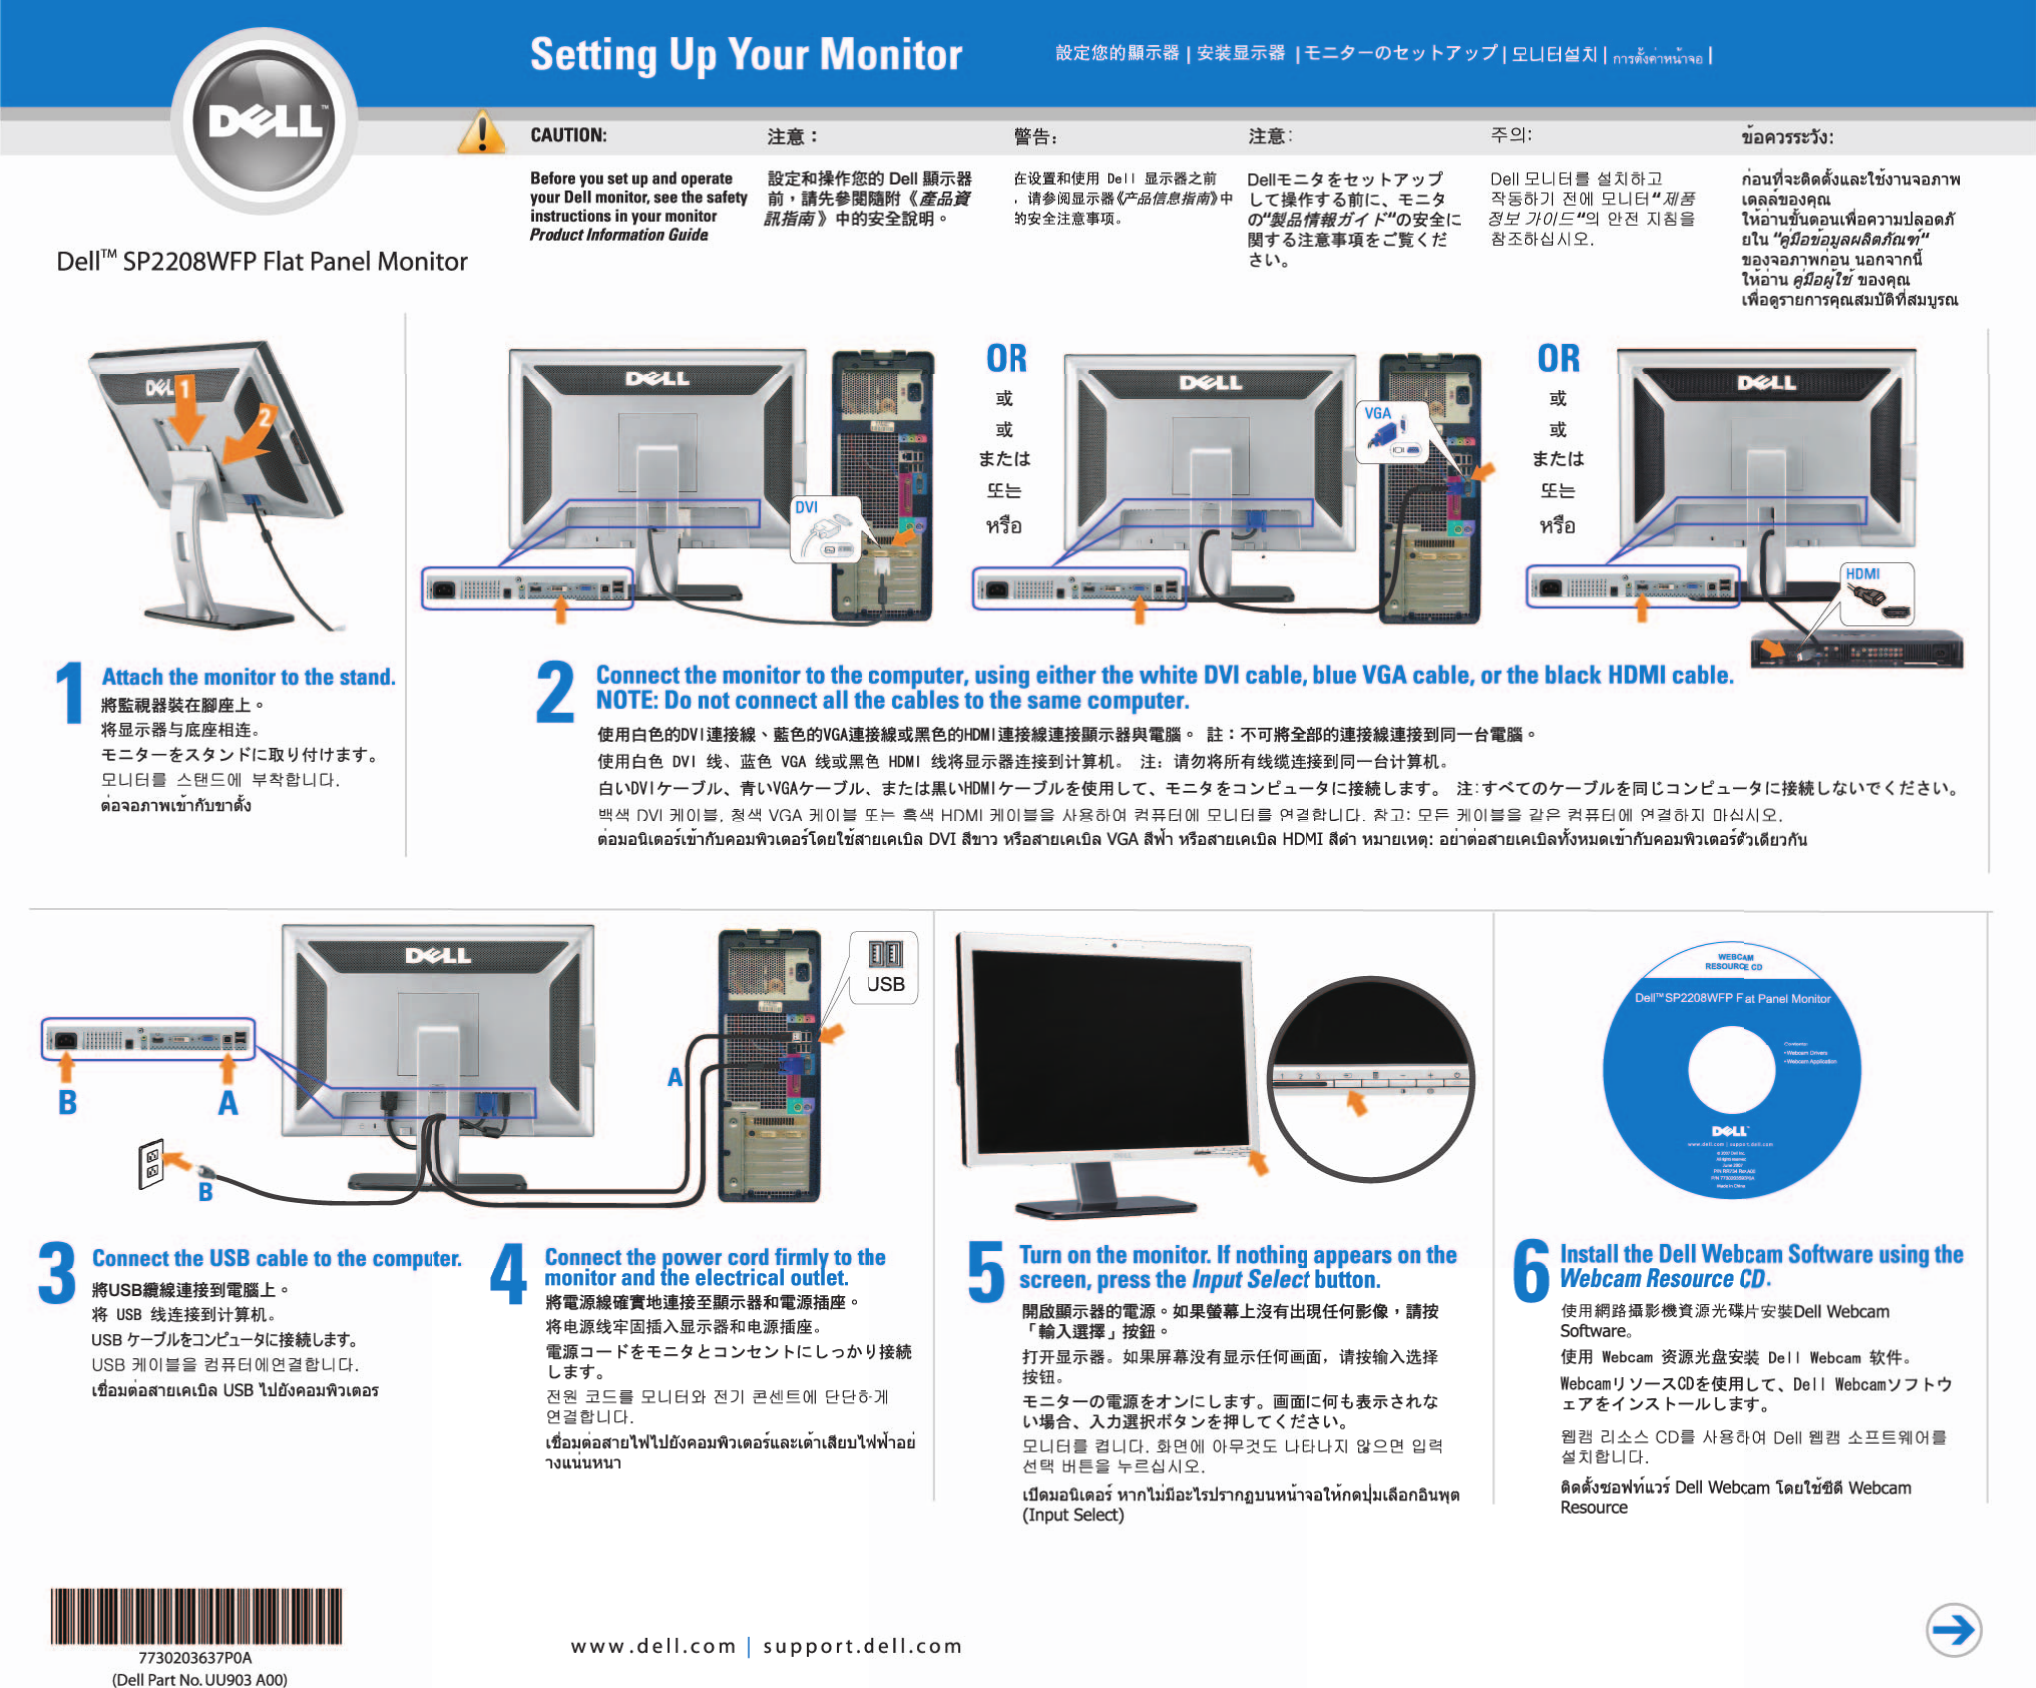 Page 3 of 4 - Dell Dell-sp2208wfp SP2208WFP Monitor Setup Diagram User Manual  - Guide En-us